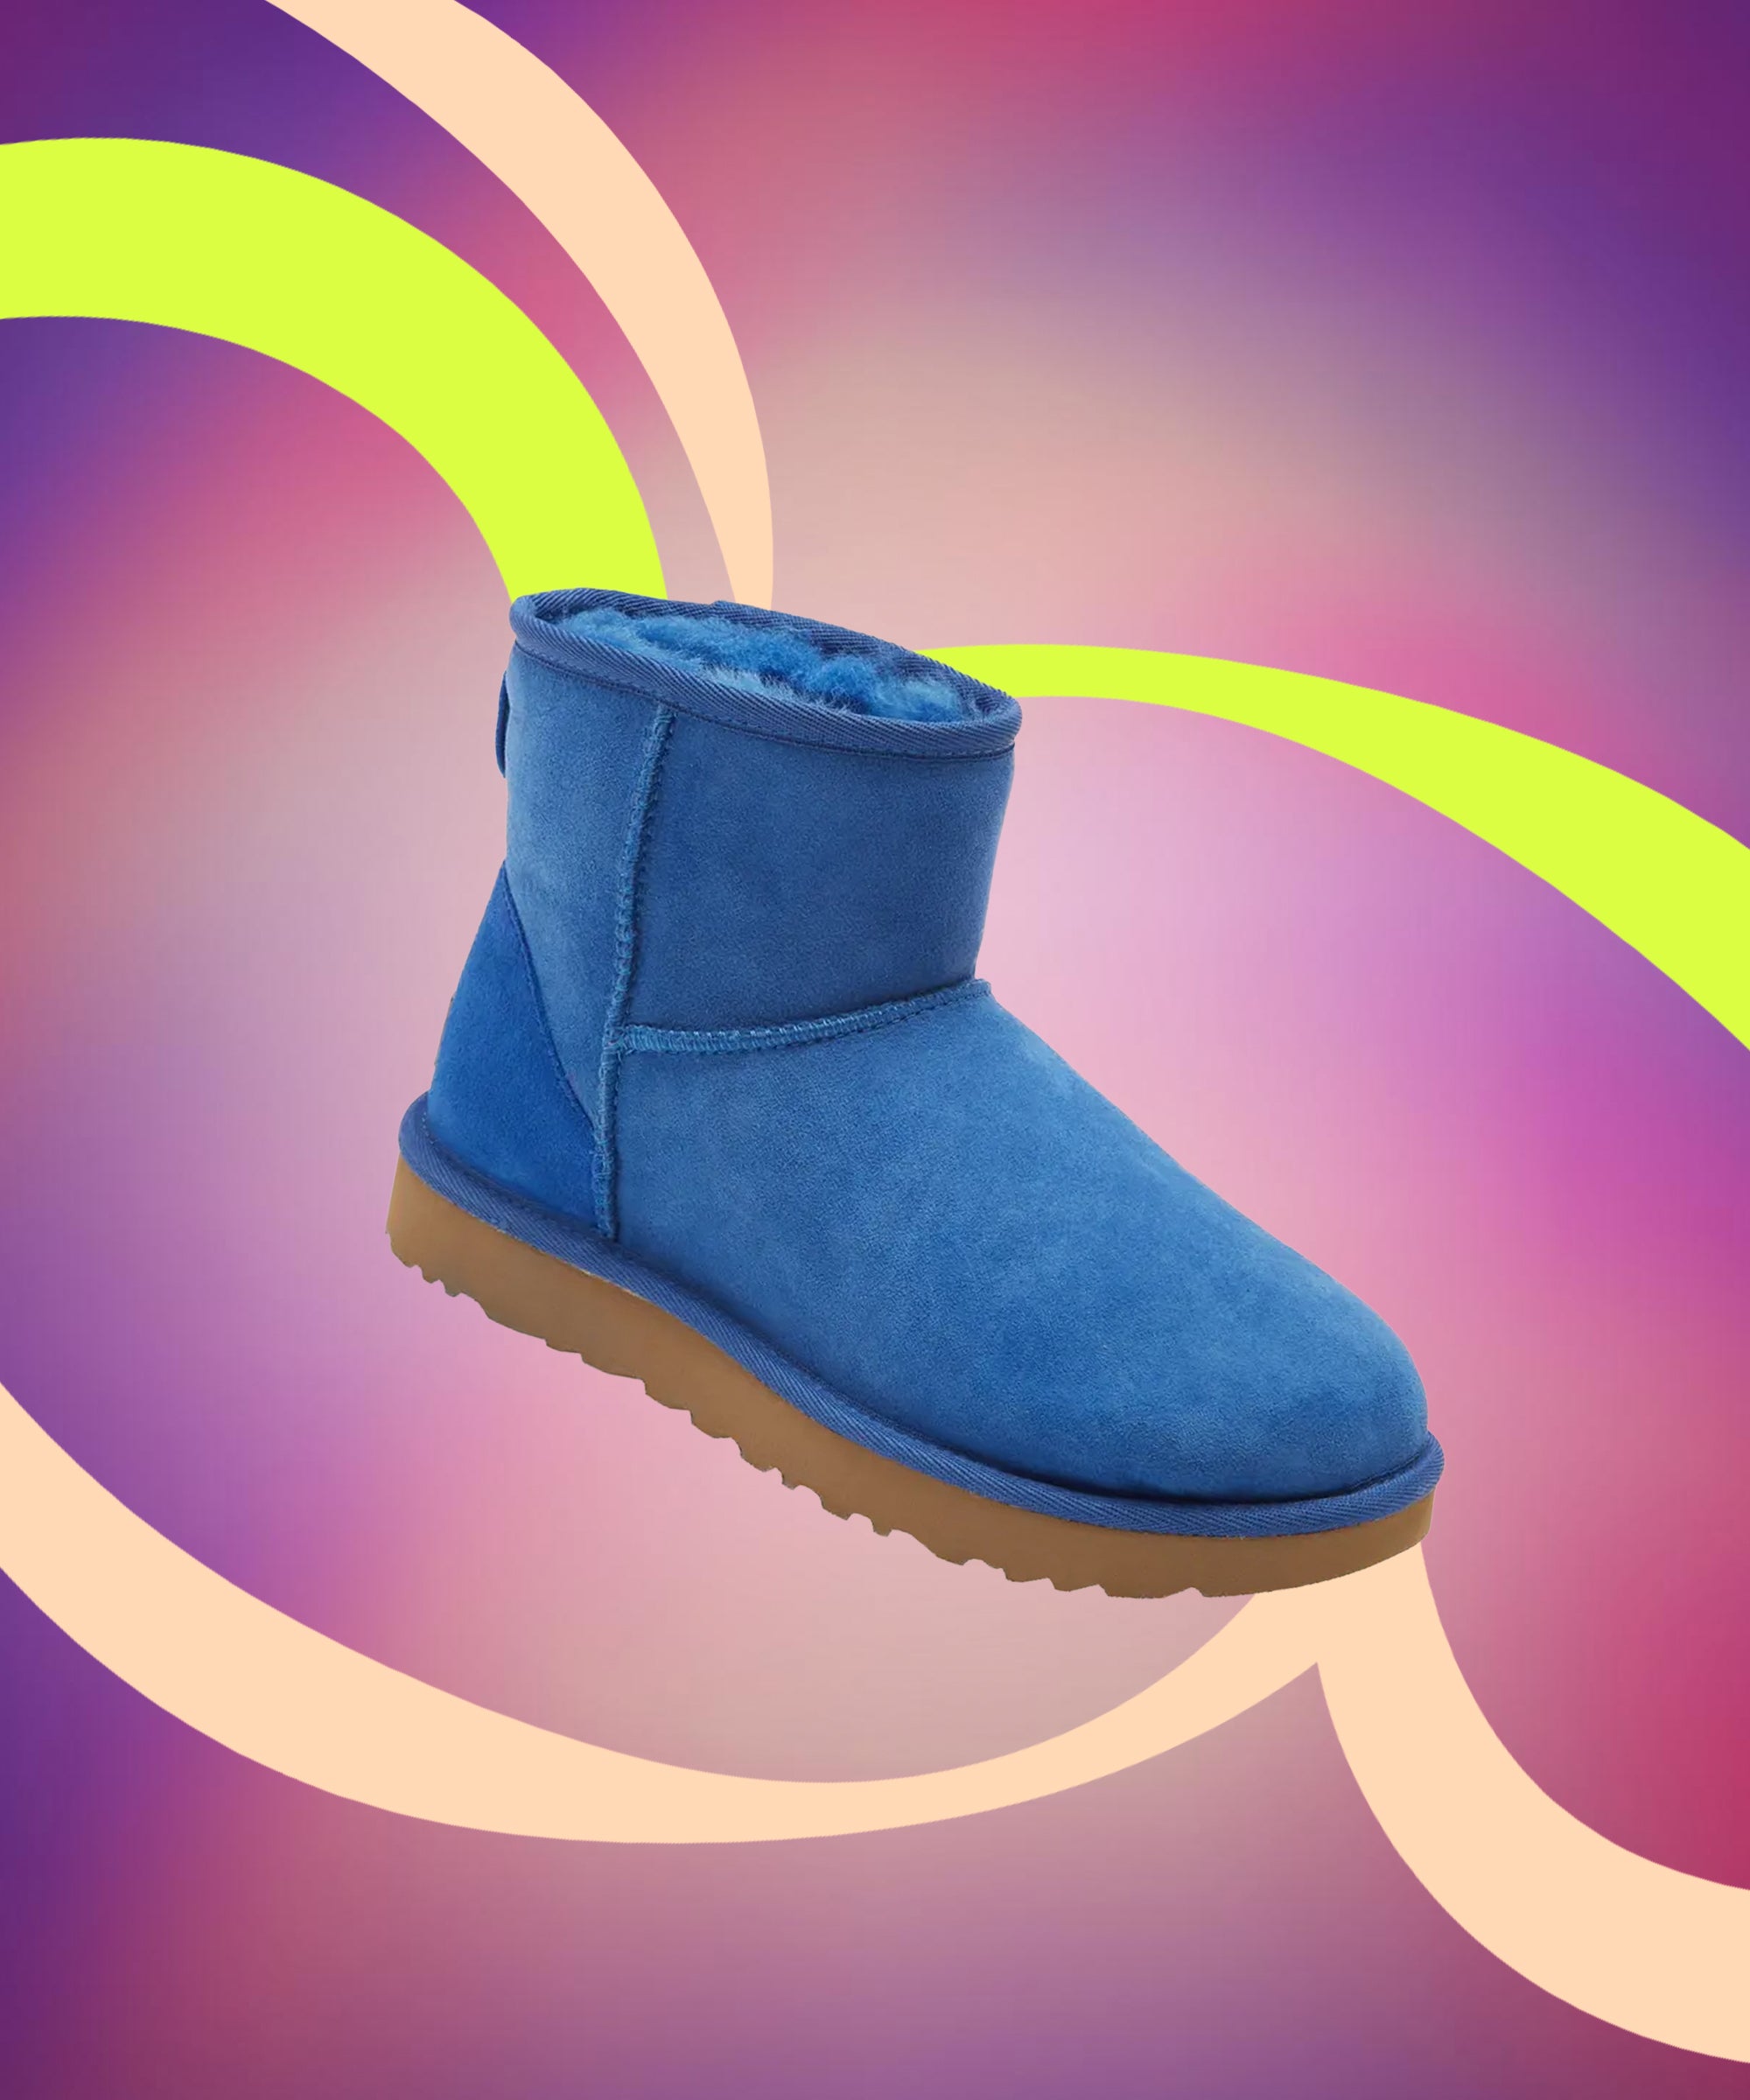 10 Best Cozy Ugg Boots and Shoes For 